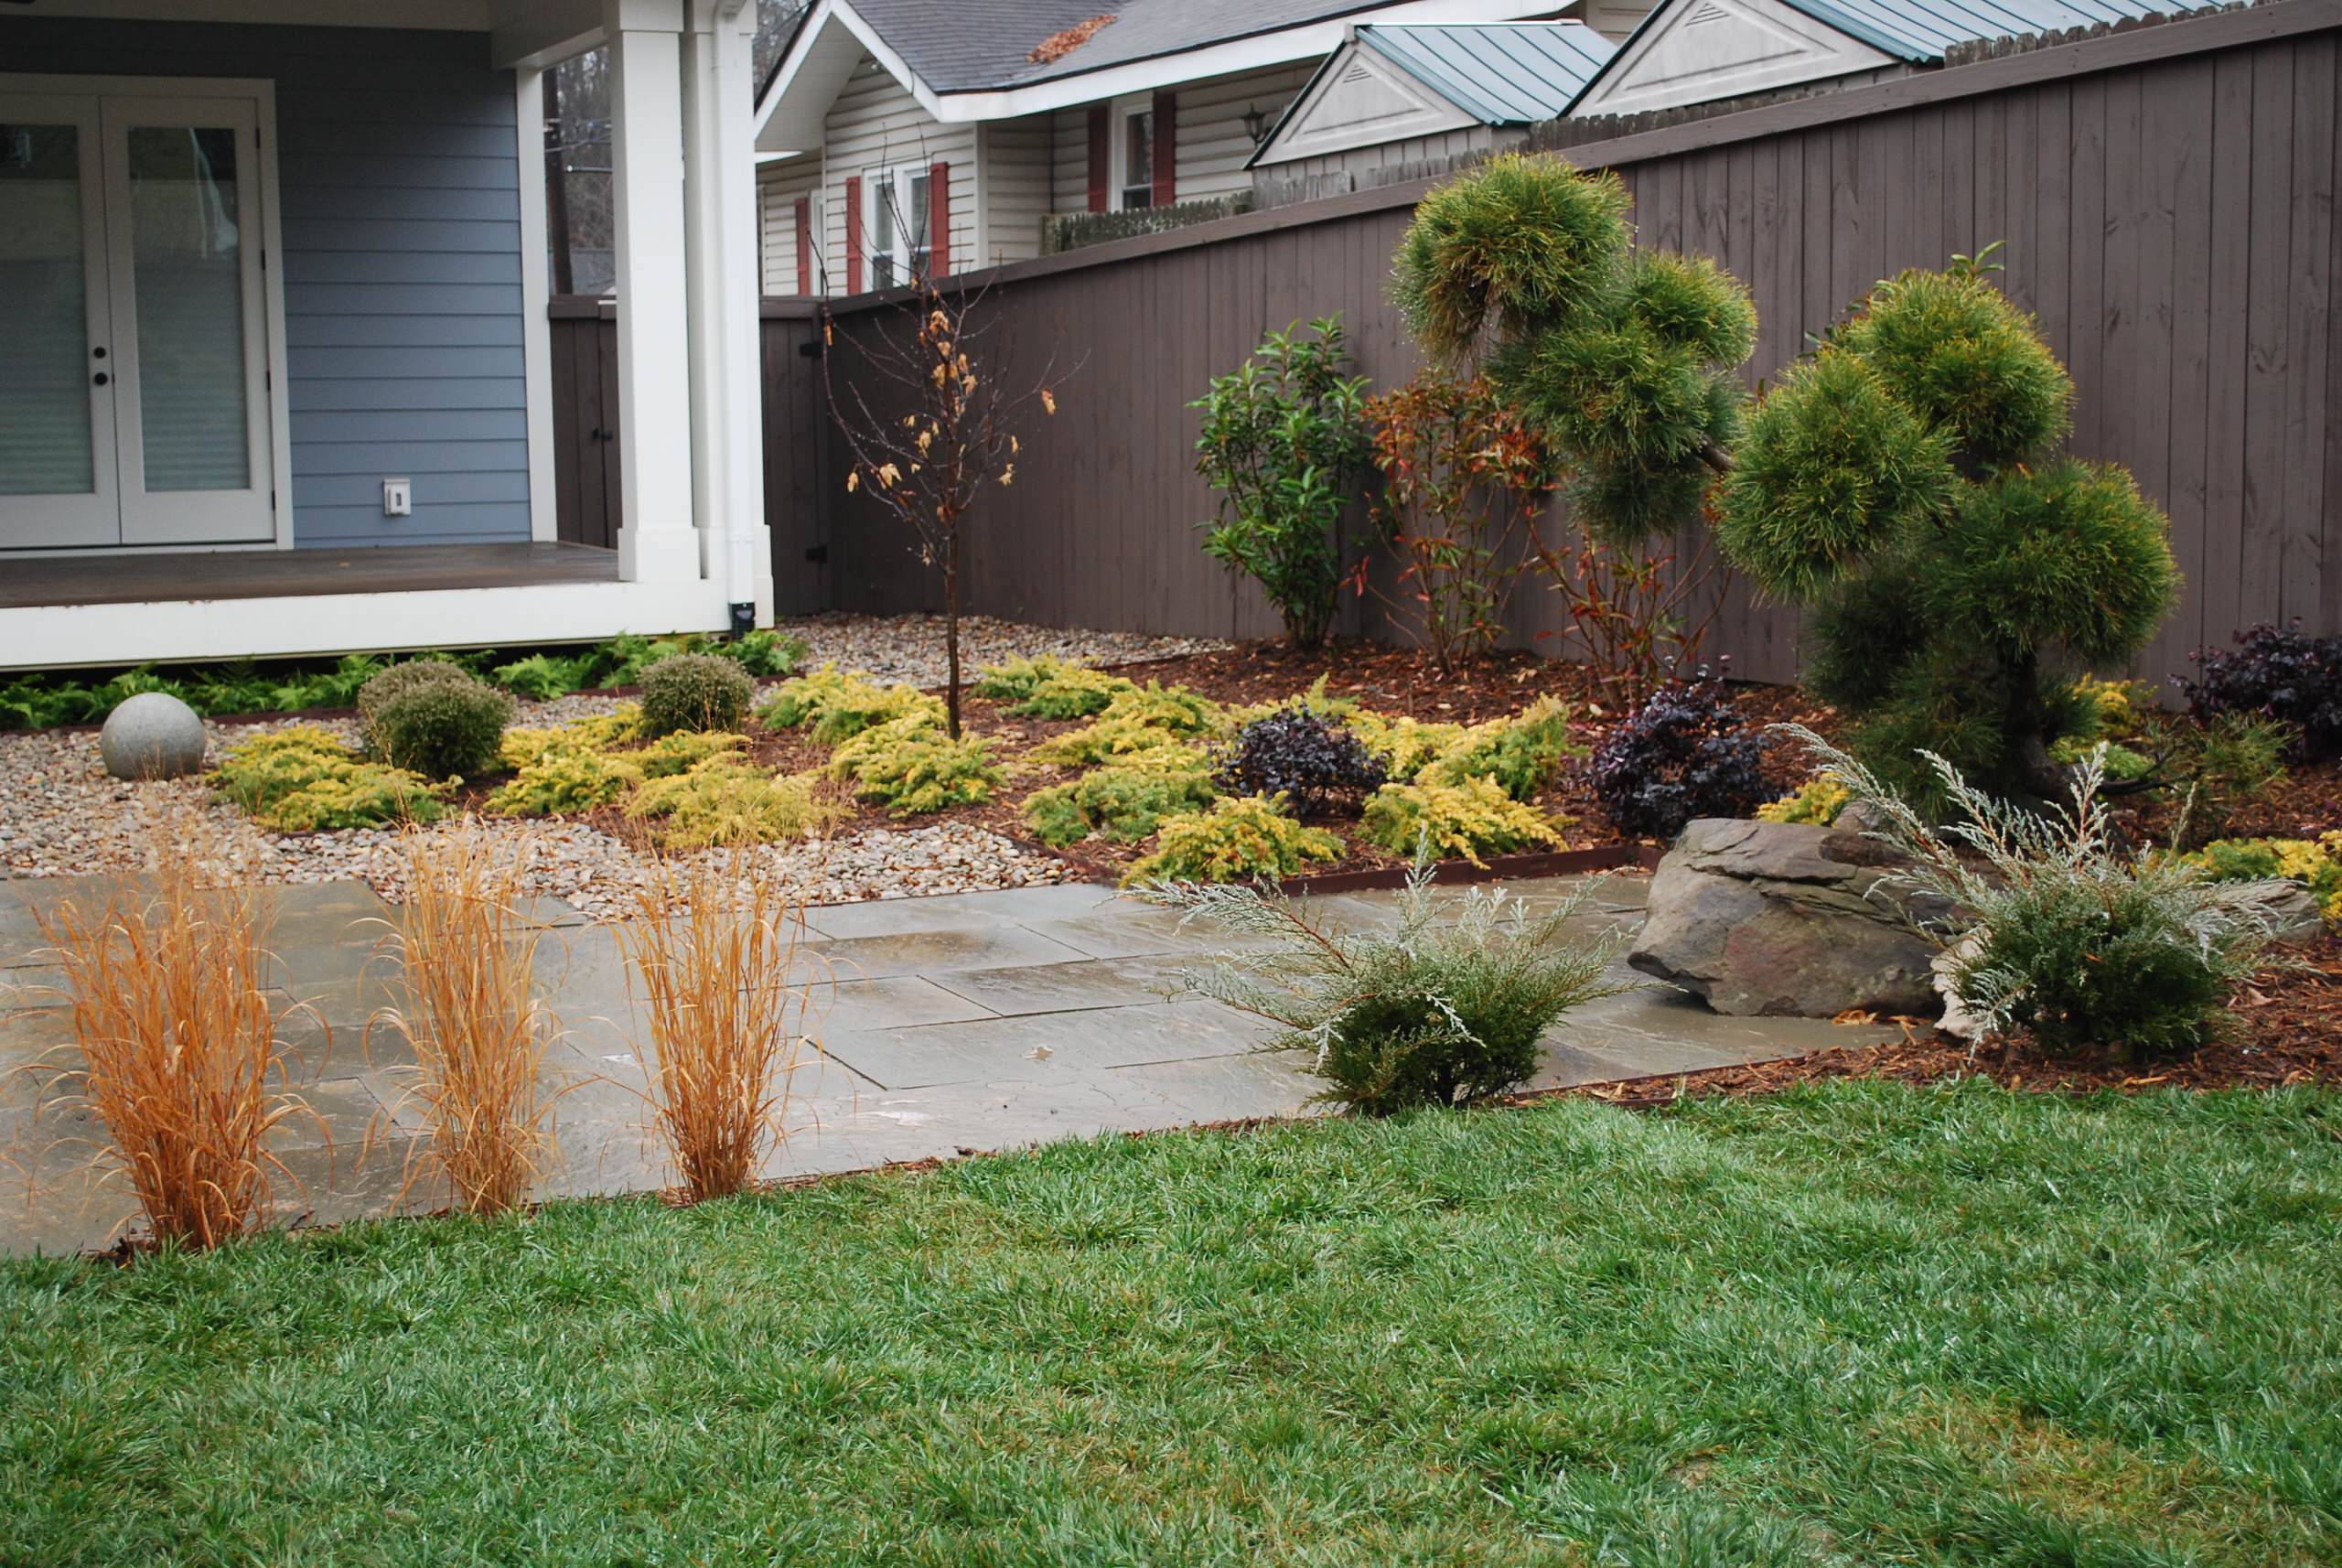 Patio and plantings, December 2014.